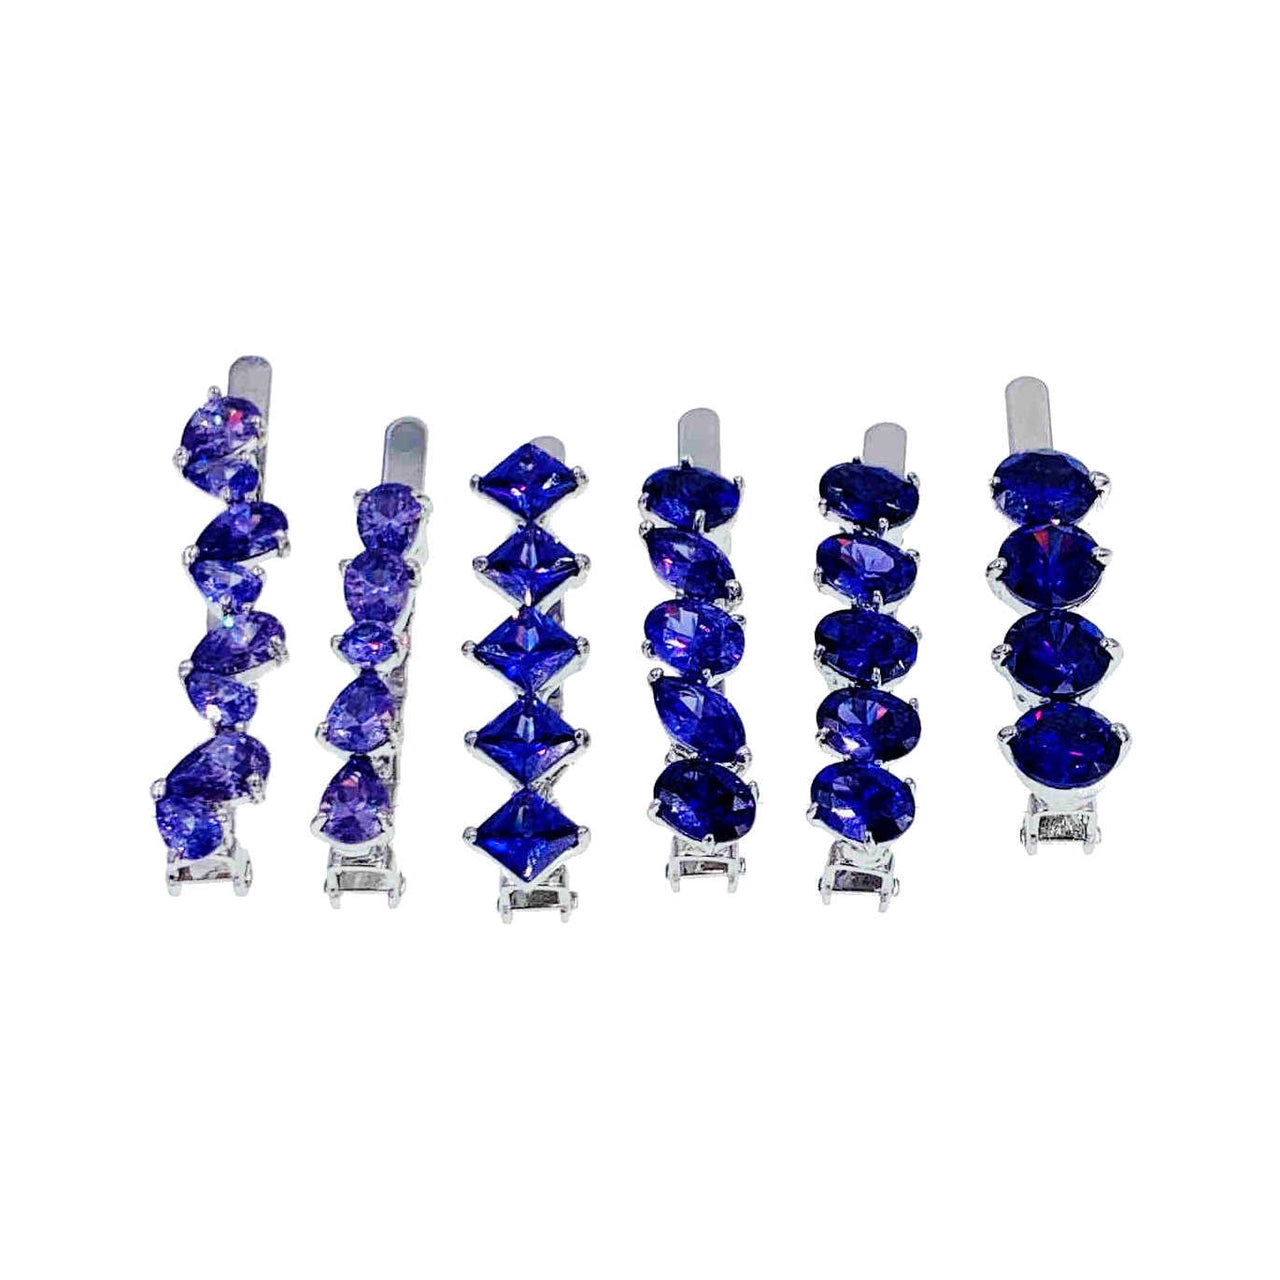 Sally Cubic Zirconia Crystal Magnetic Barrette Hair Clip Set Collection